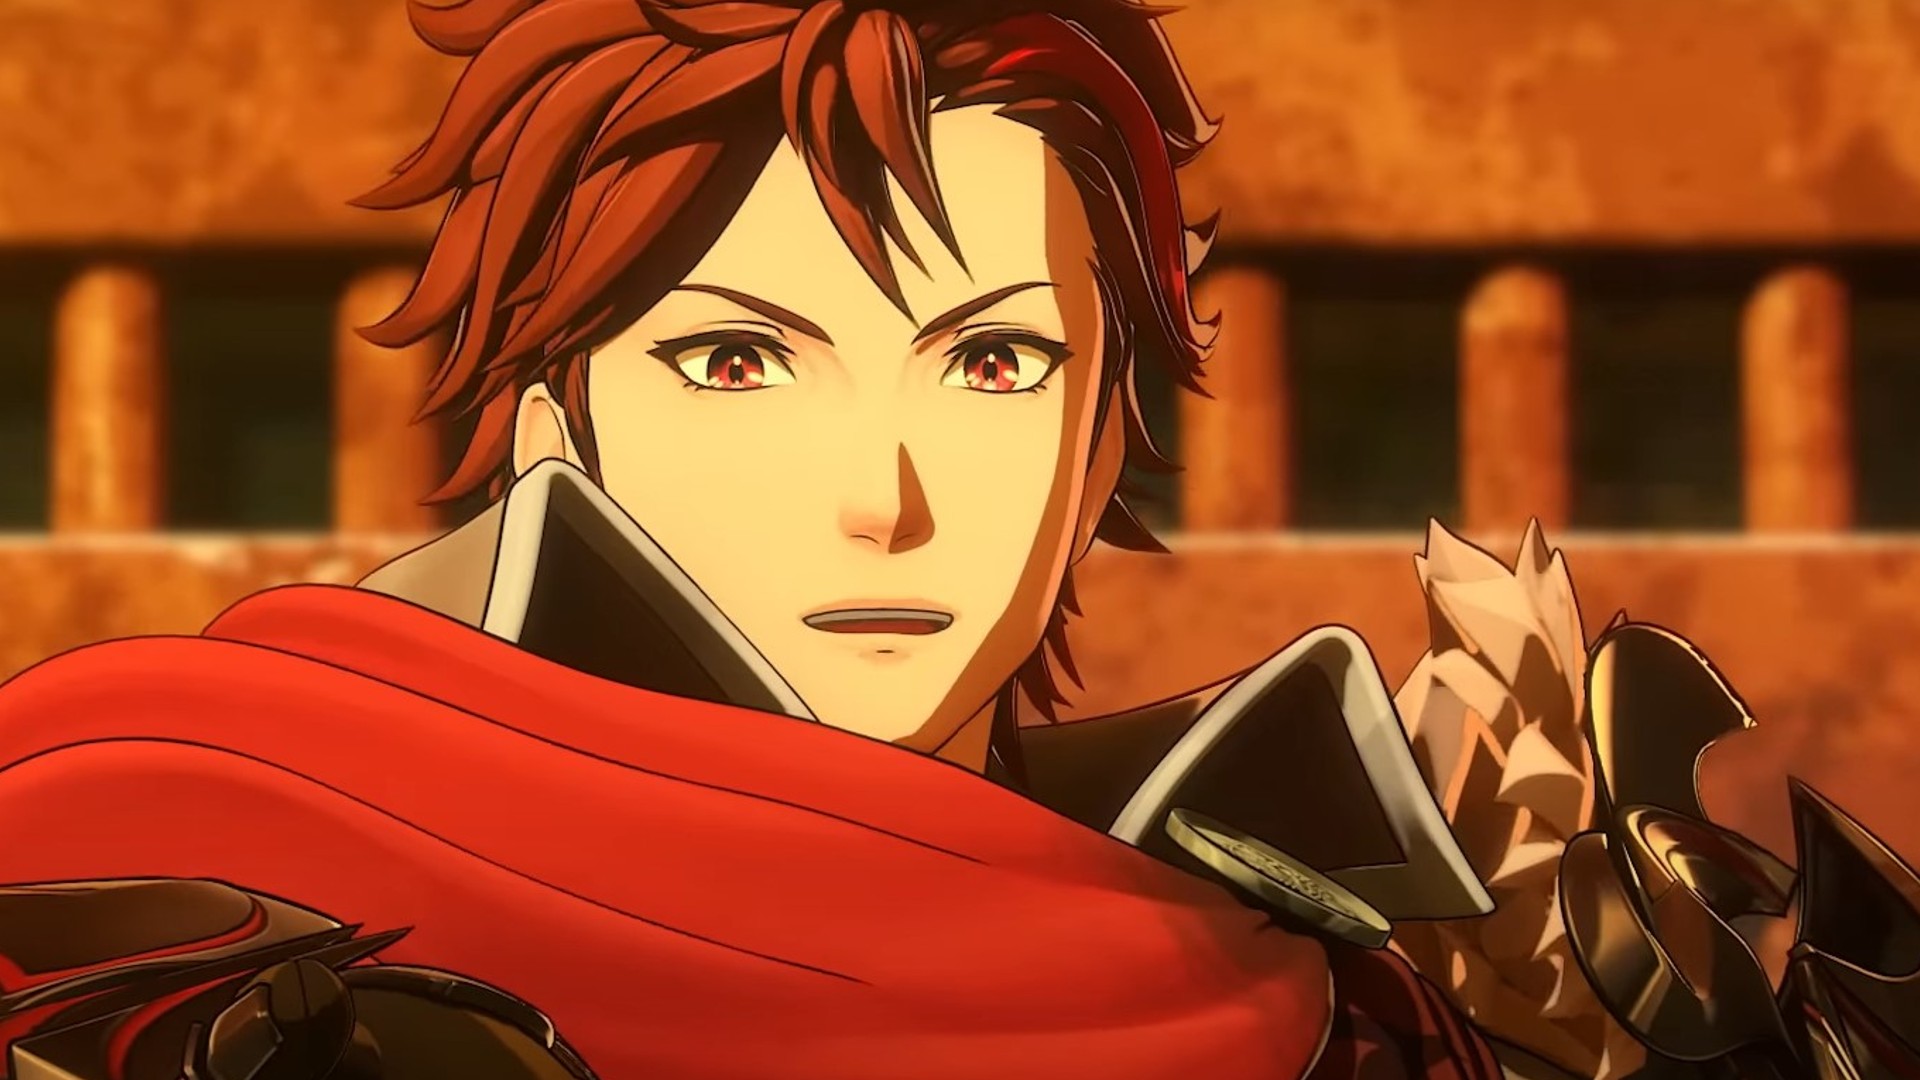 Fire Emblem Engage release time approaches as JRPG nears launch The